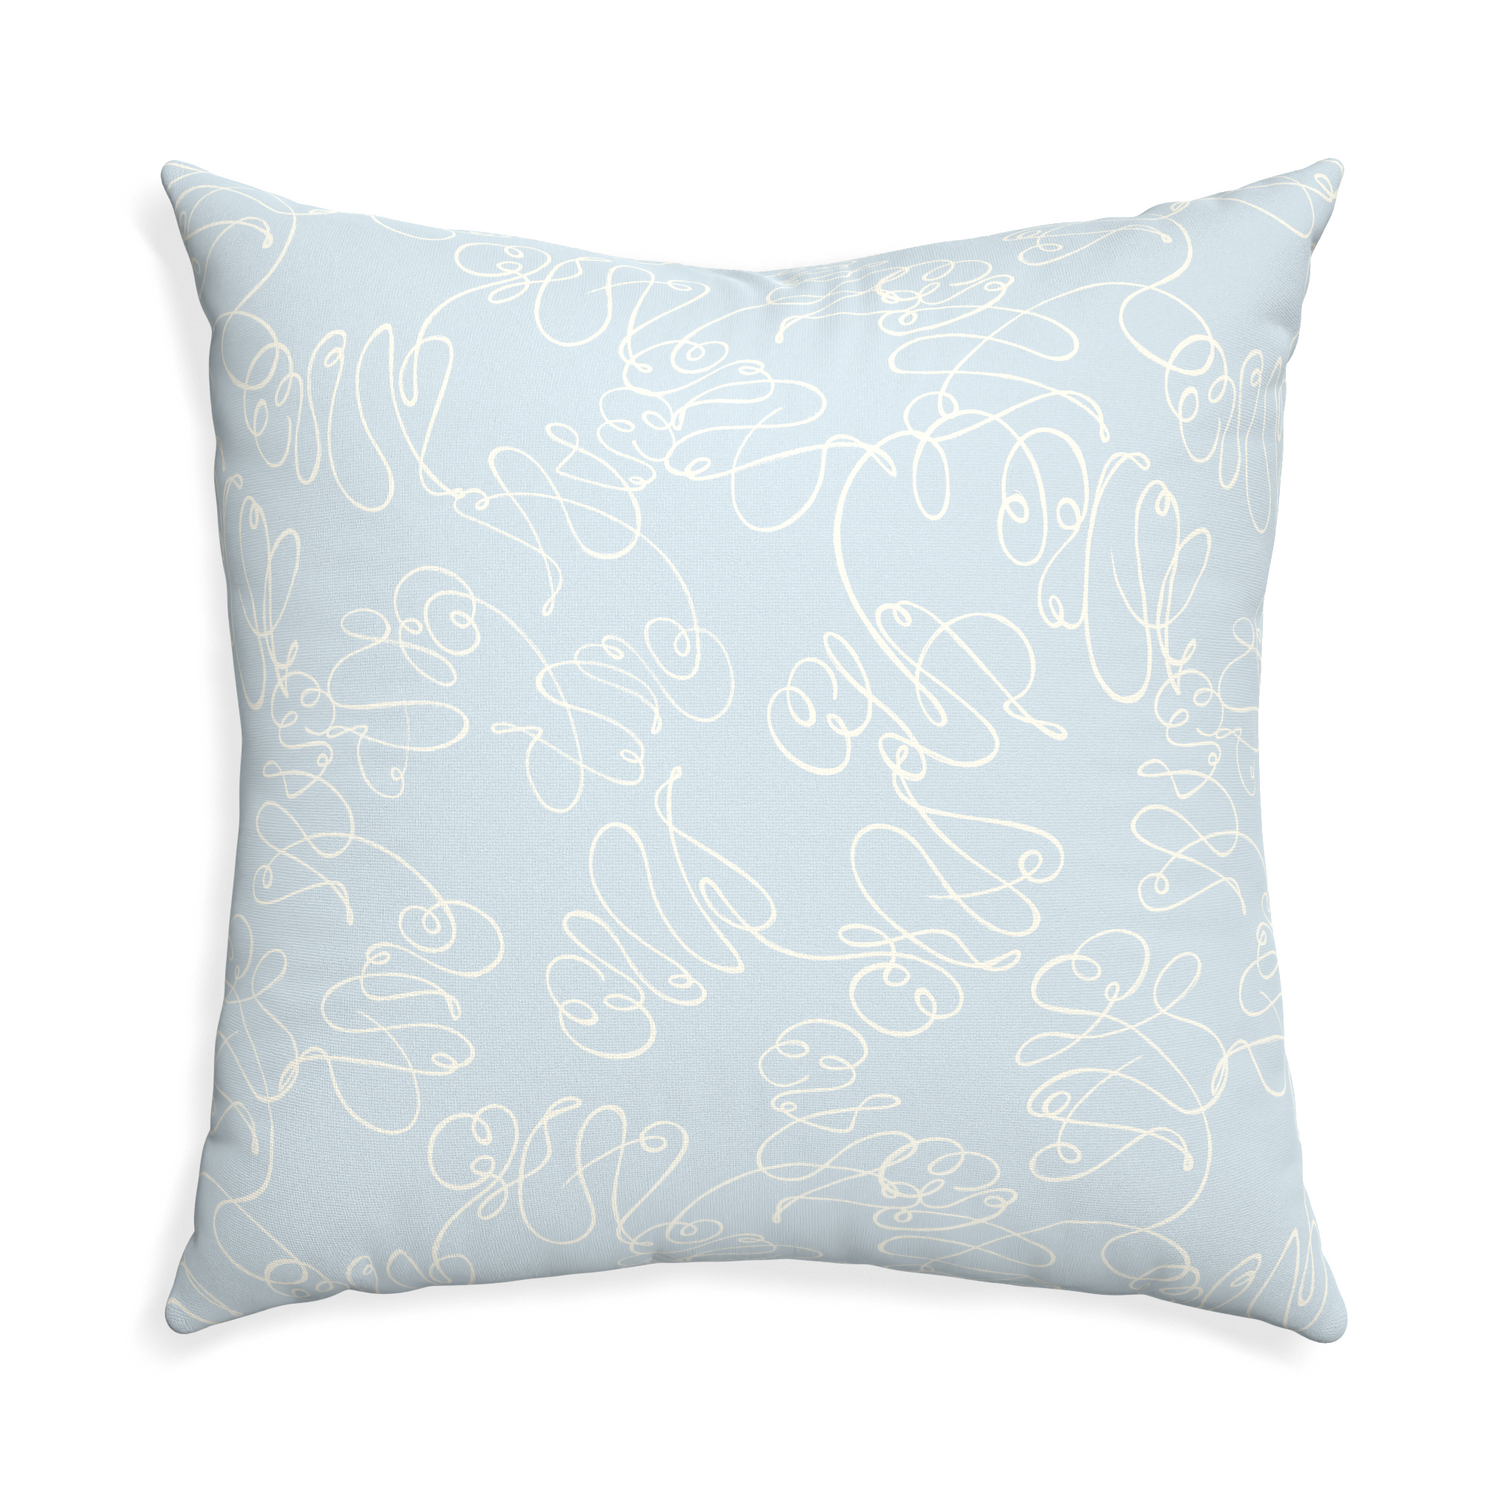 Euro-sham mirabella custom powder blue abstractpillow with none on white background